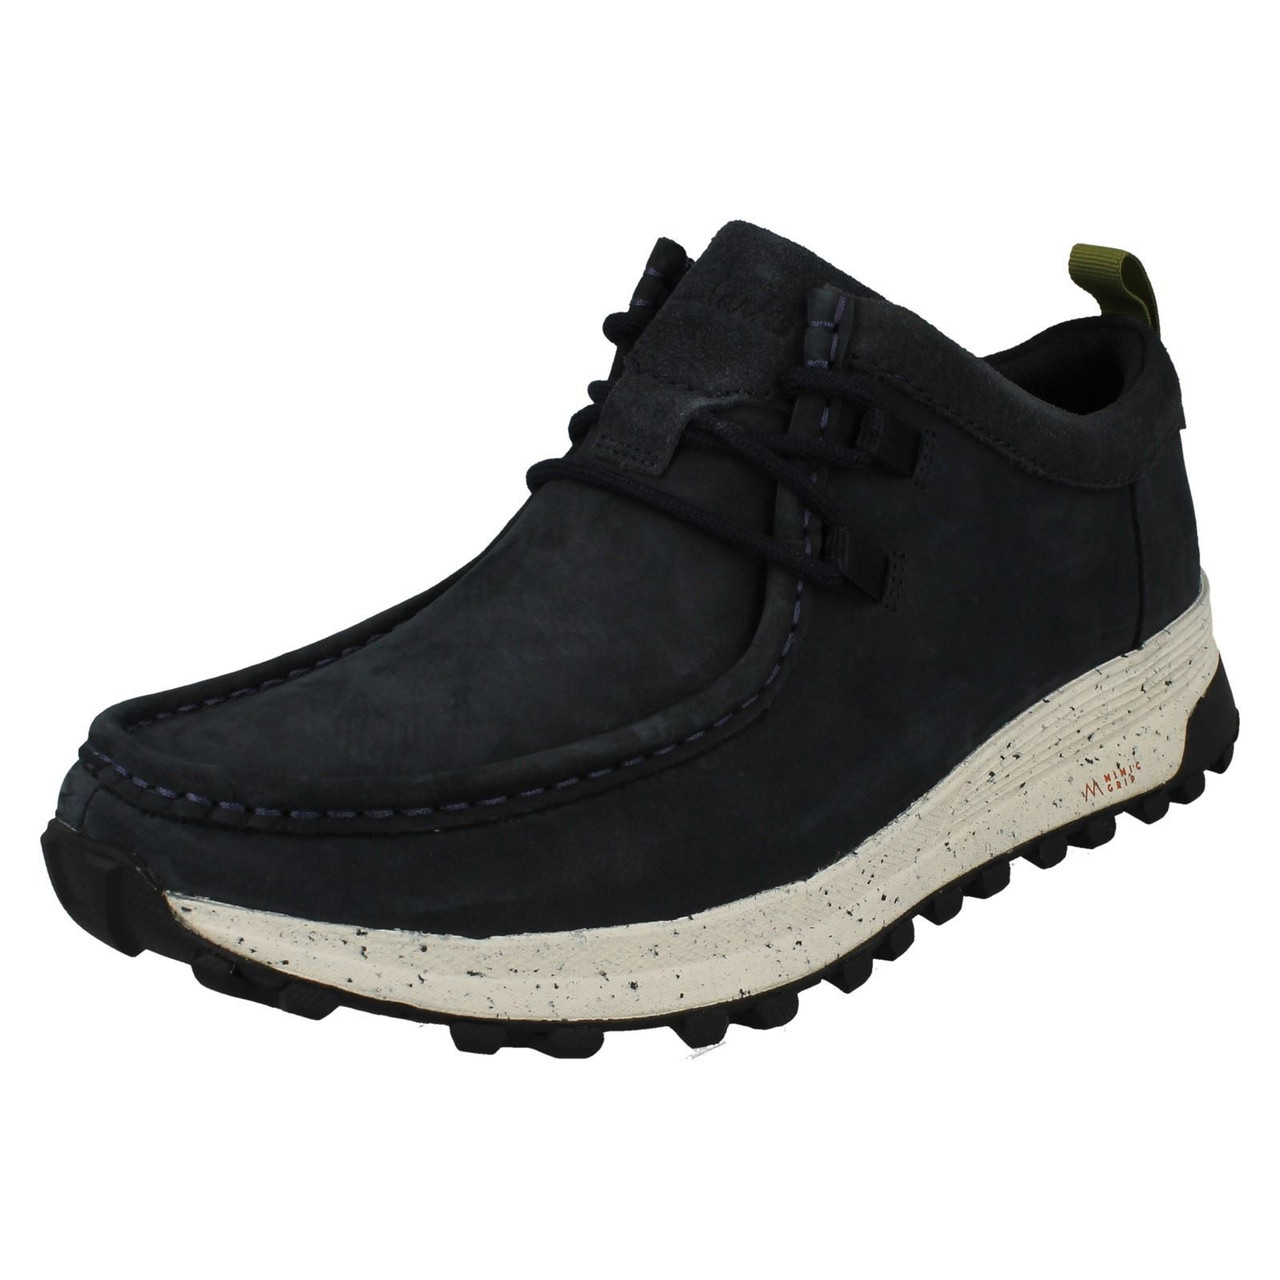 Mens Clarks Moccasin Detailed All Terrain Leisure Shoes - ATL Trek Wally